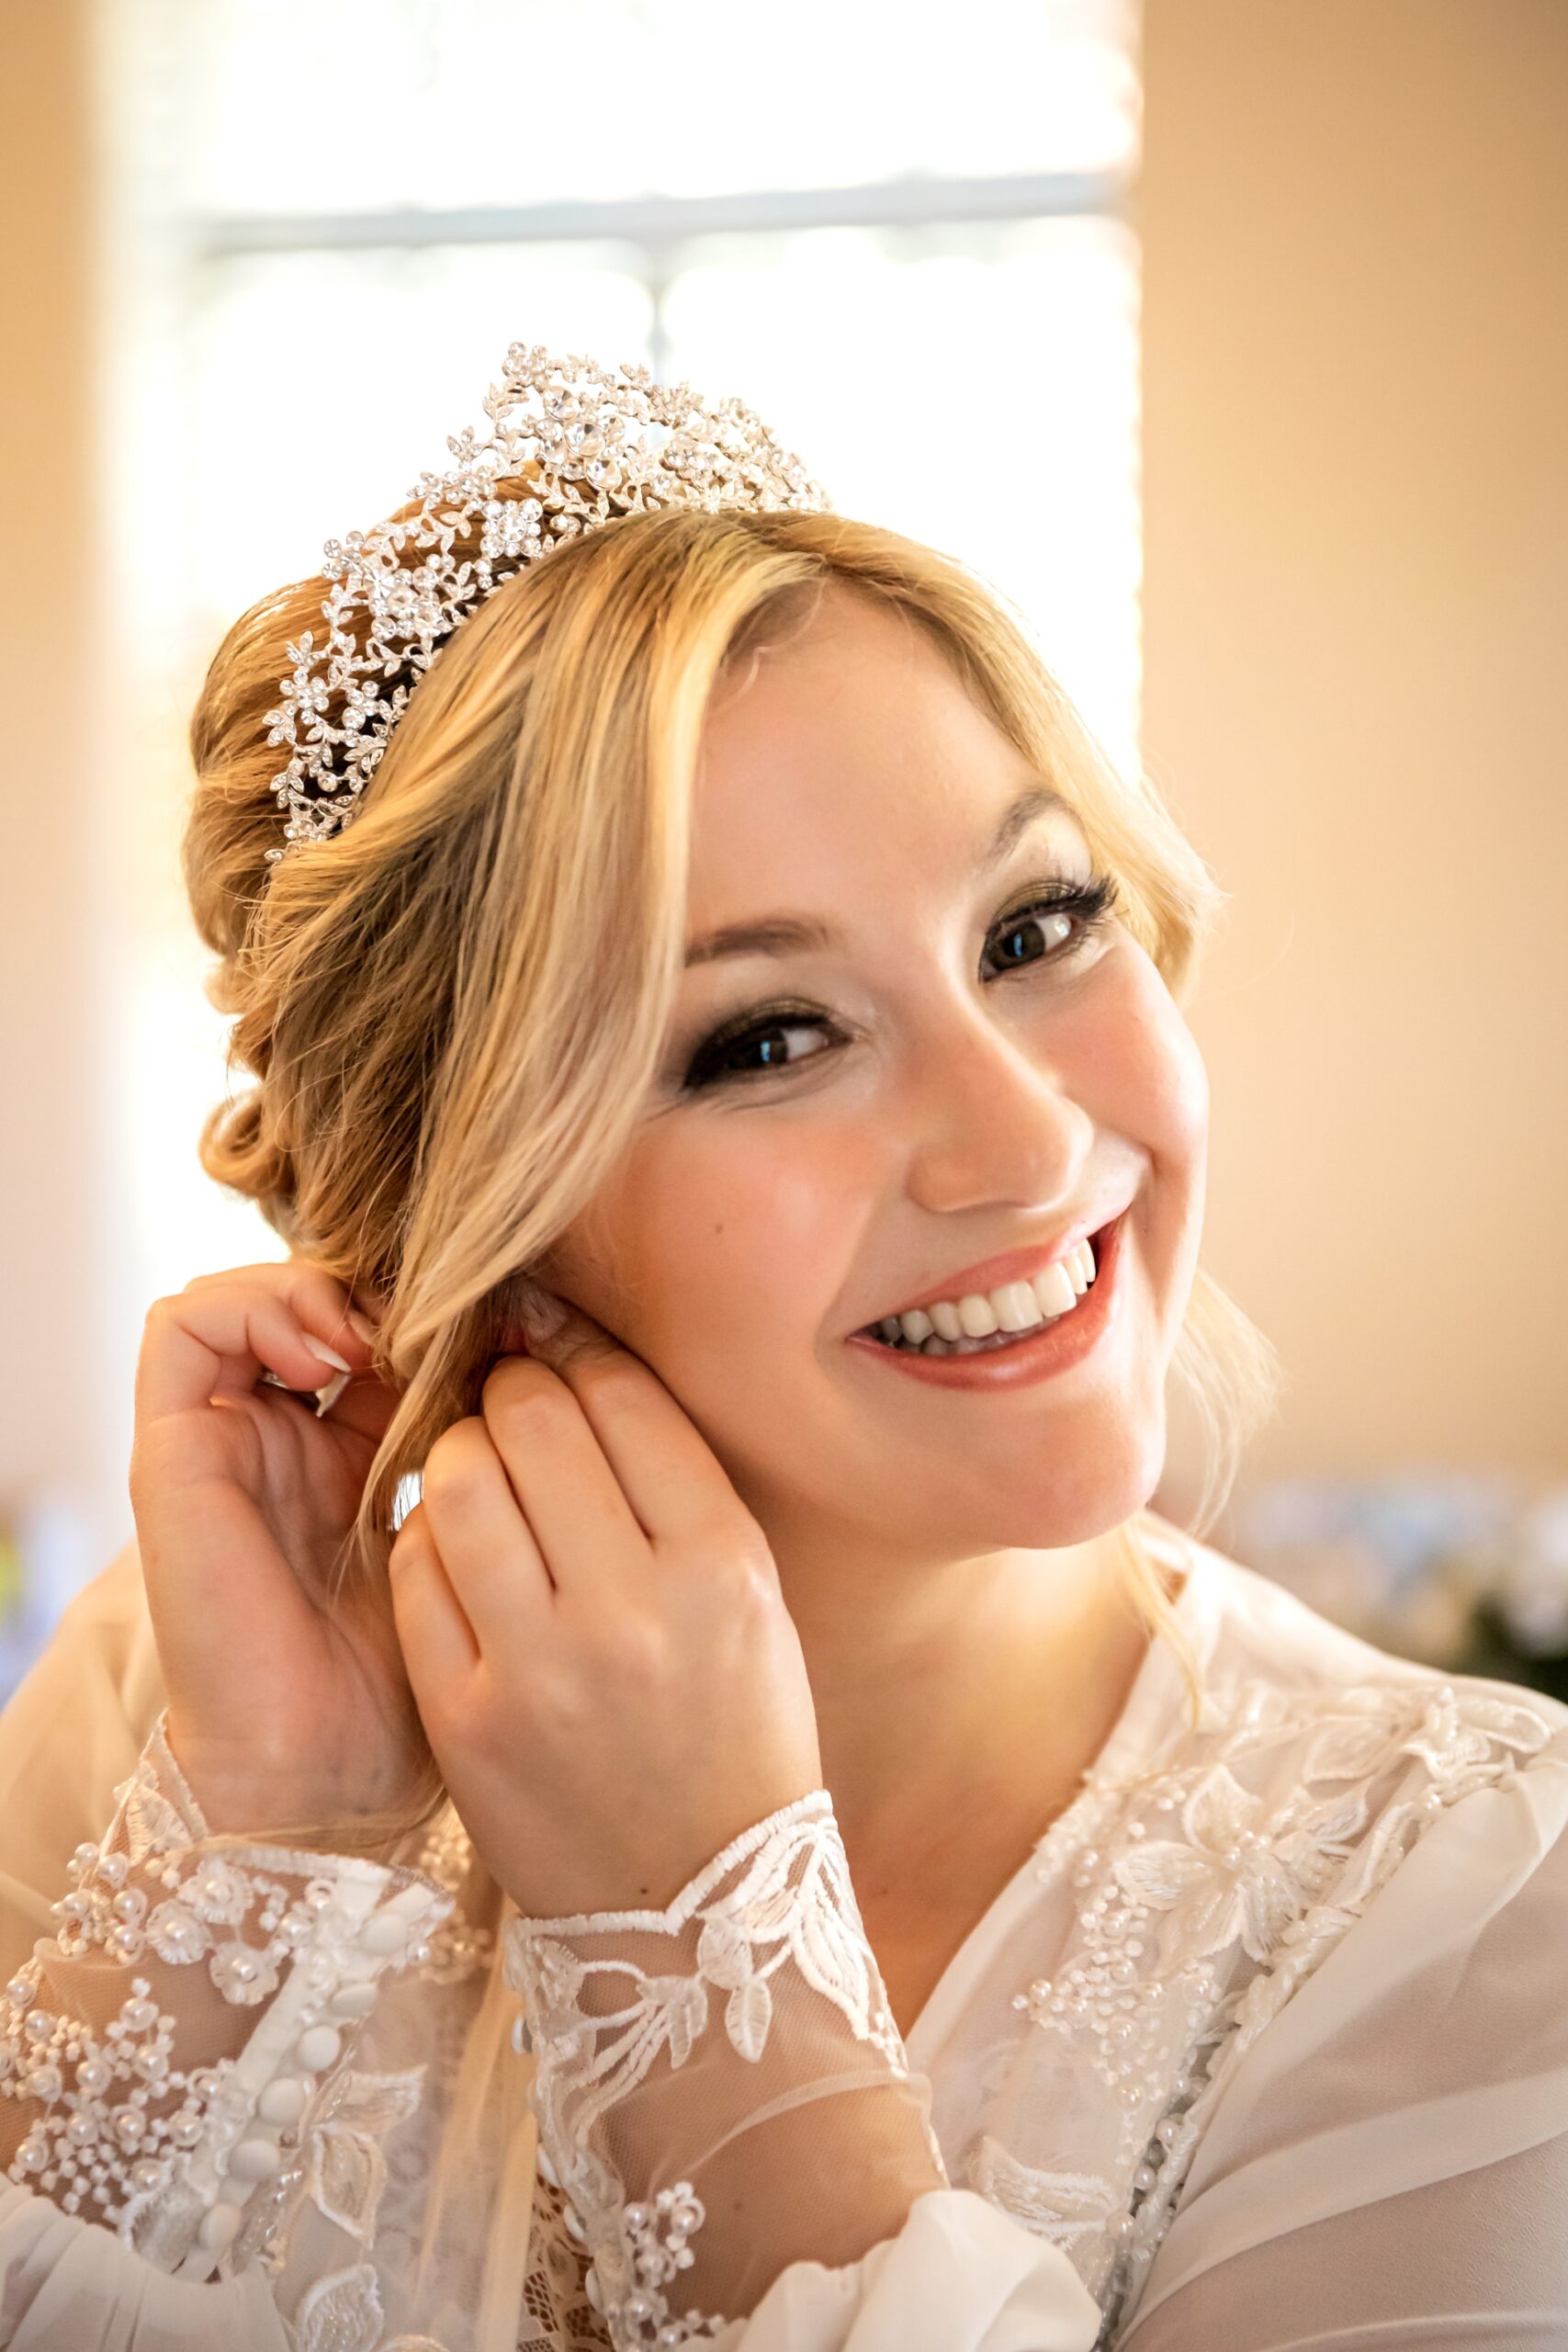 Bride, Morgan, putting on her earrings and smiling at the camera